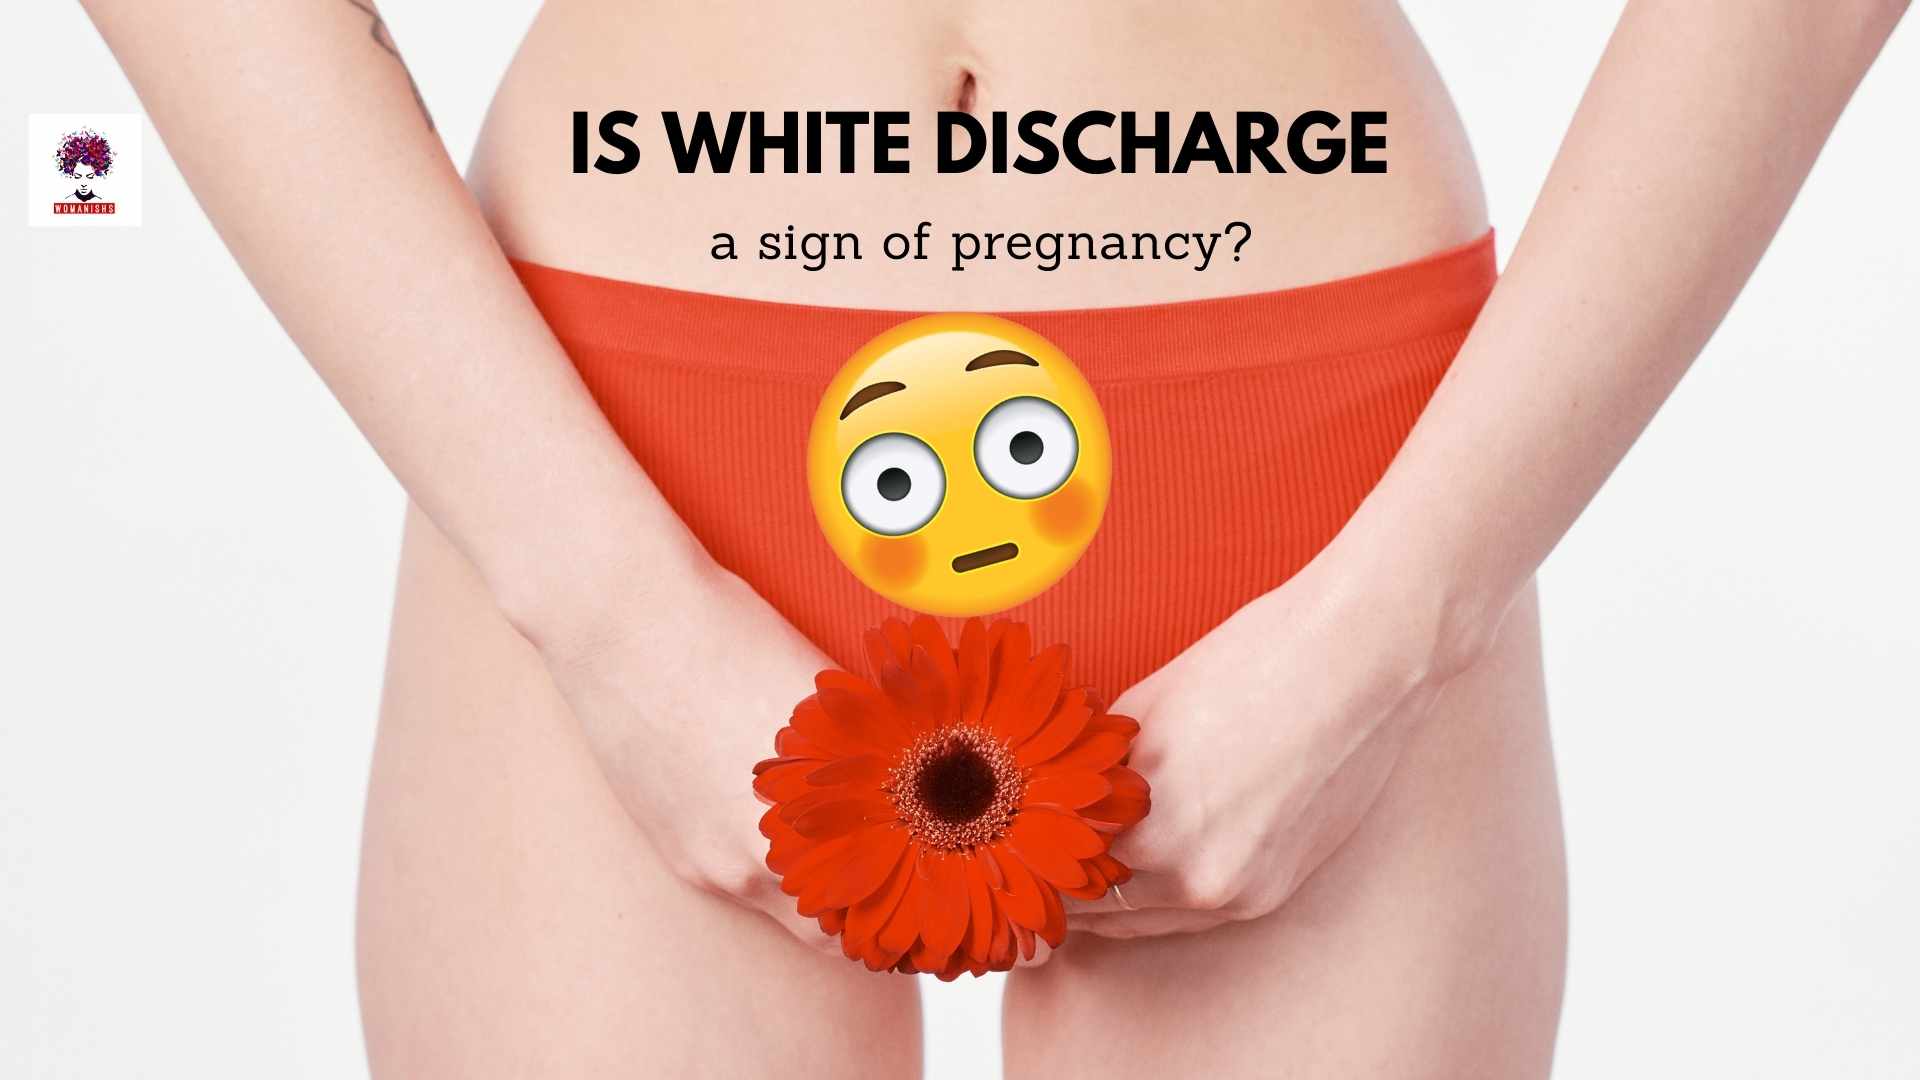 Is white discharge a sign of pregnancy